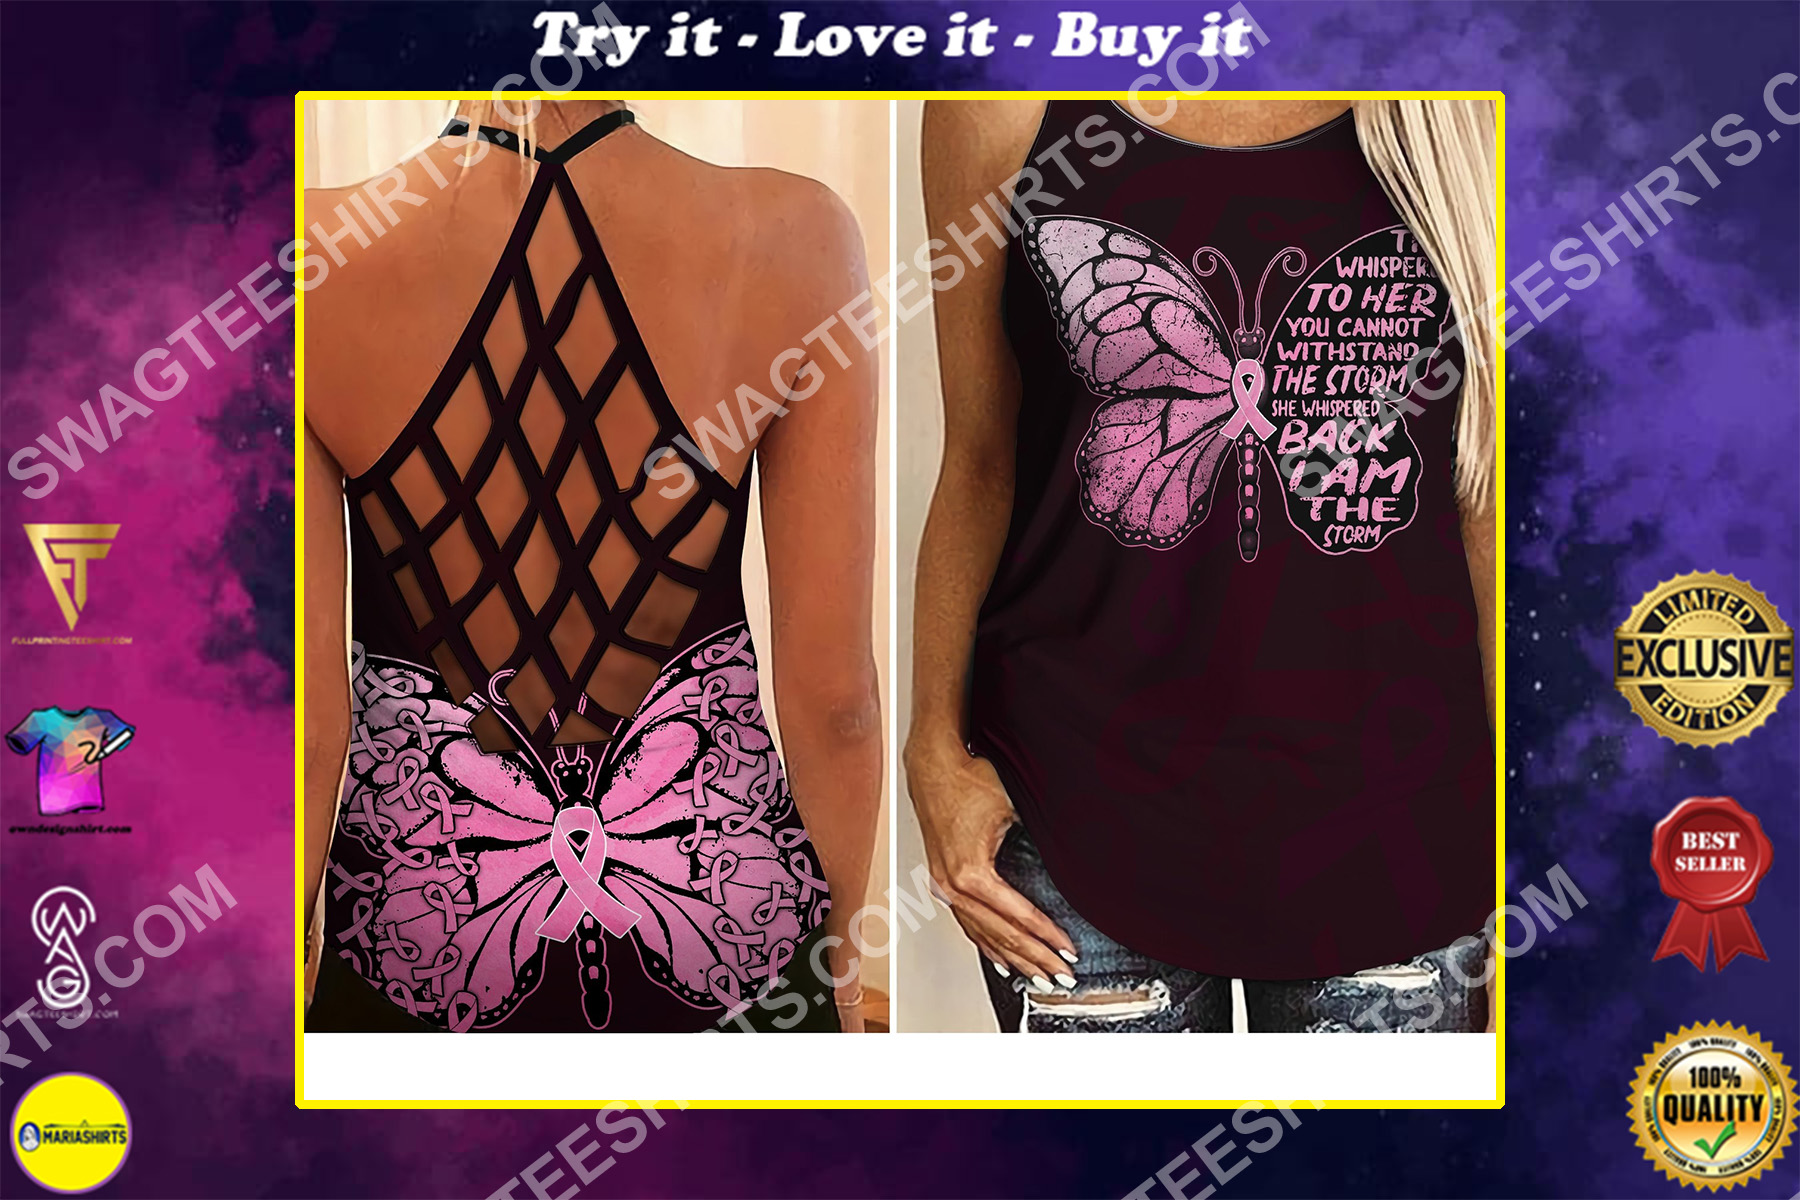 they whispered to her you cannot withstand the storm breast cancer criss-cross tank top